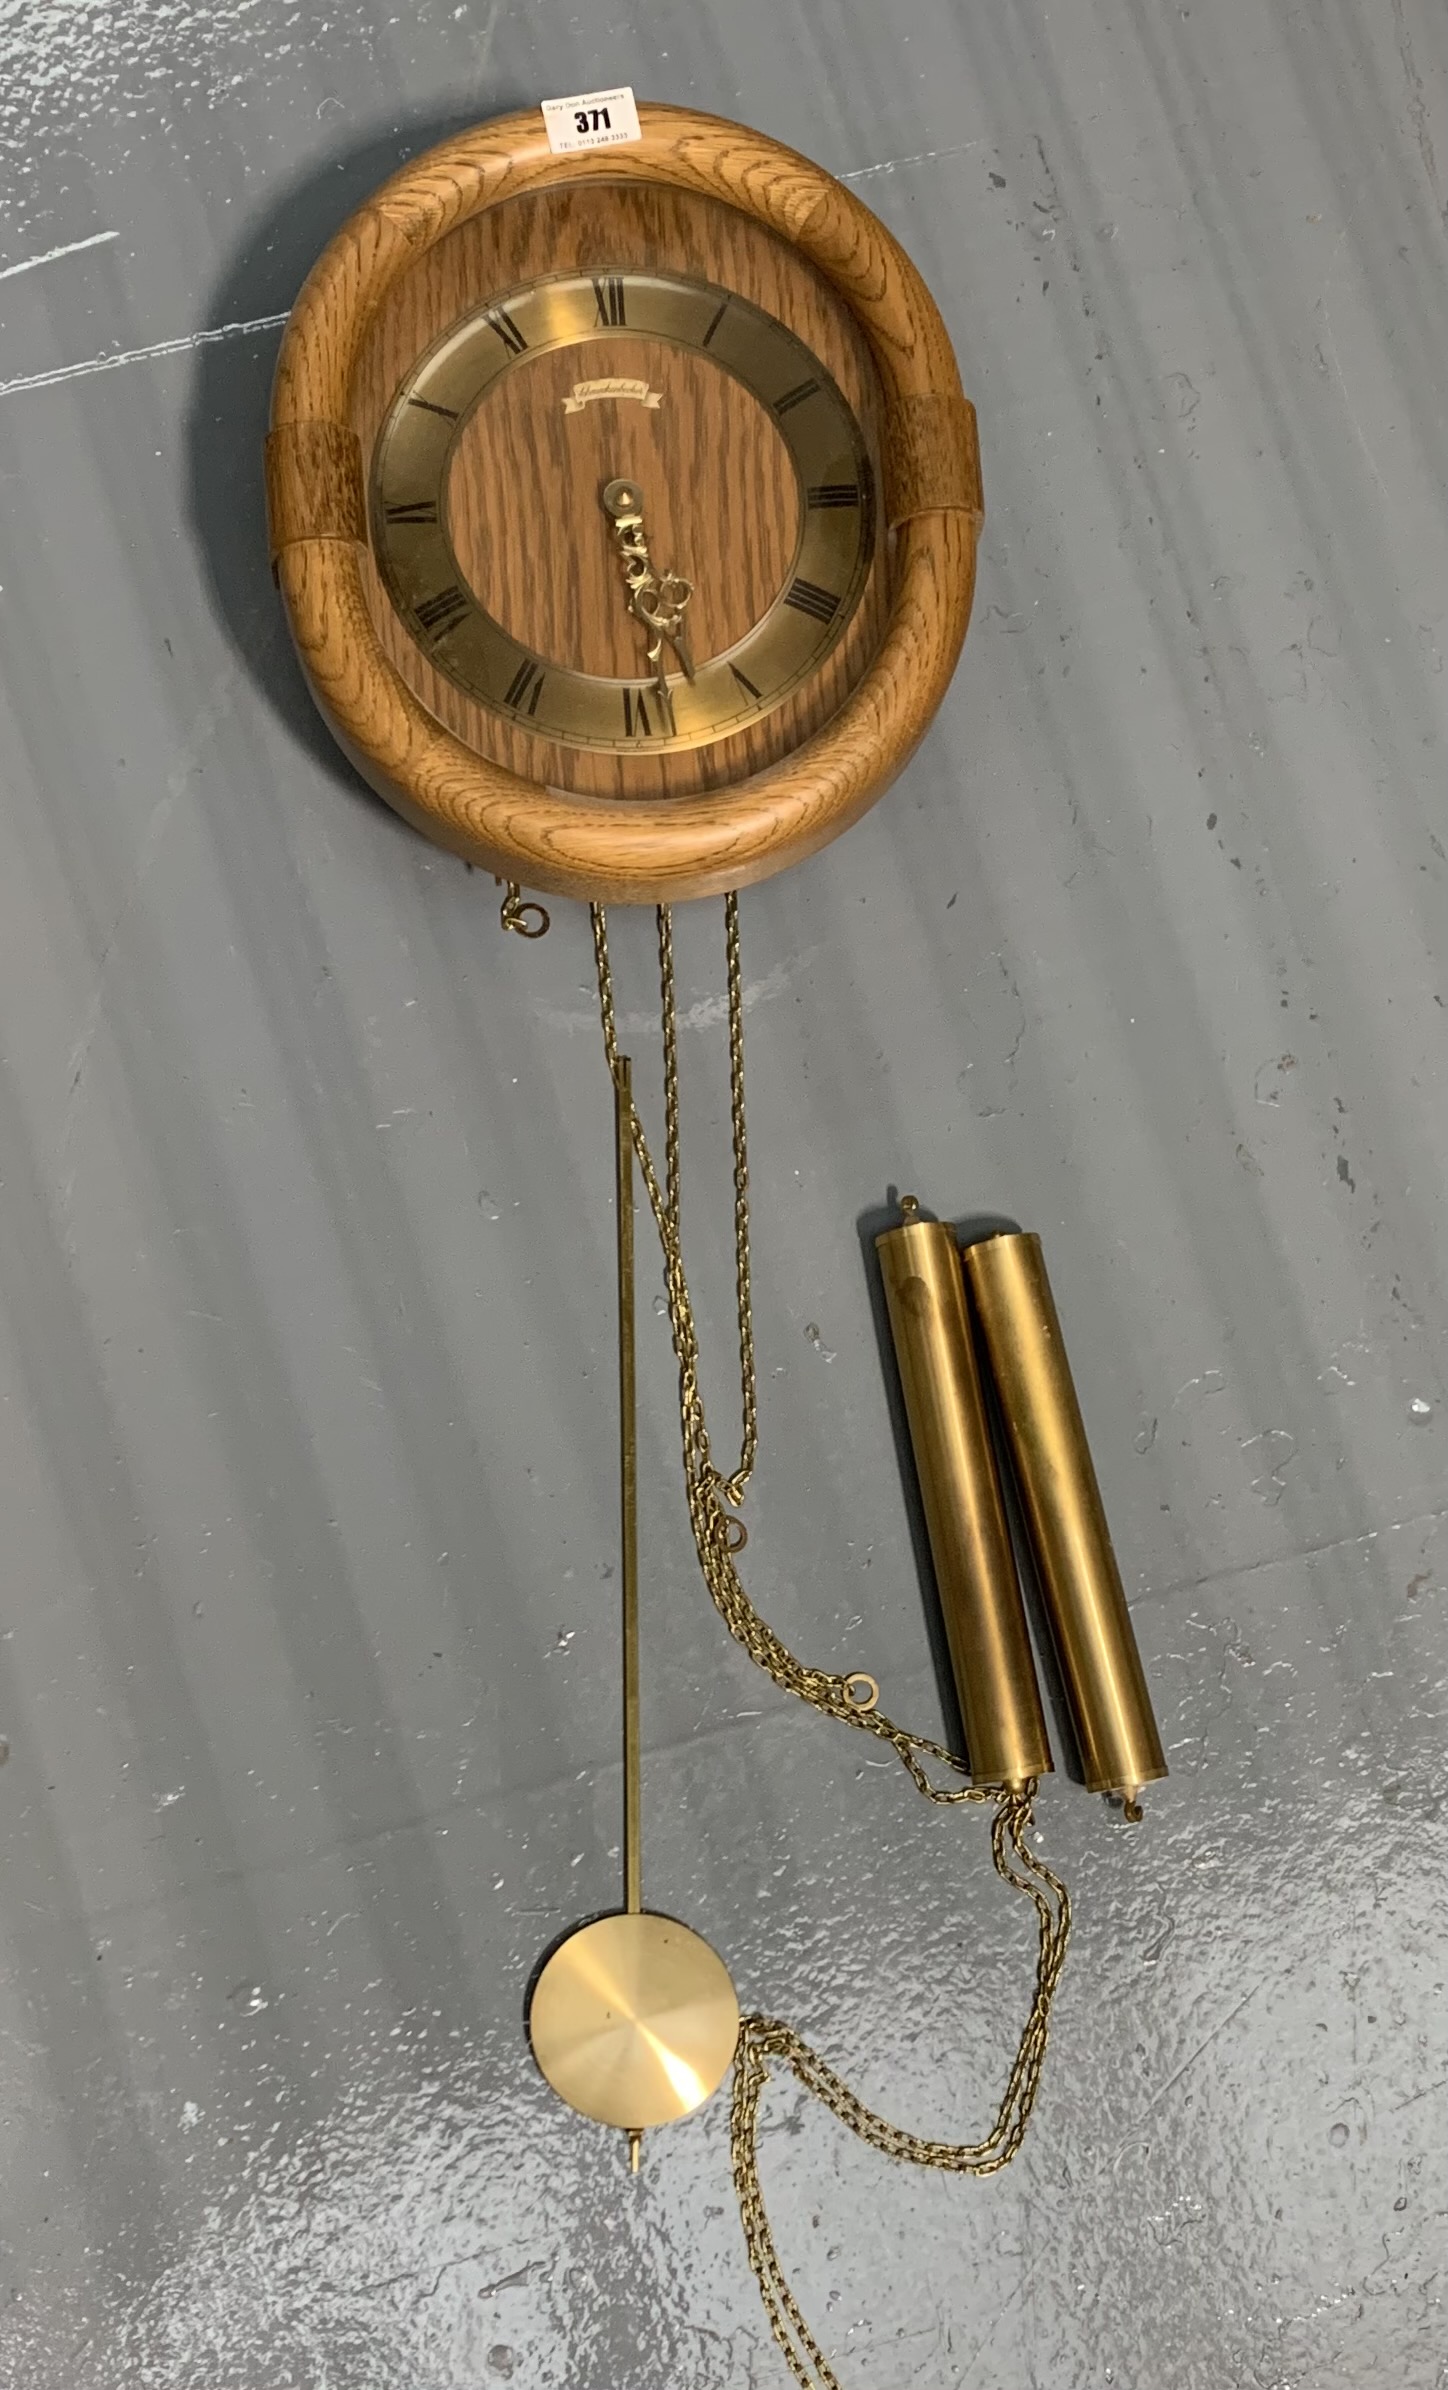 Modern German wall clock with pendulum and 2 weights